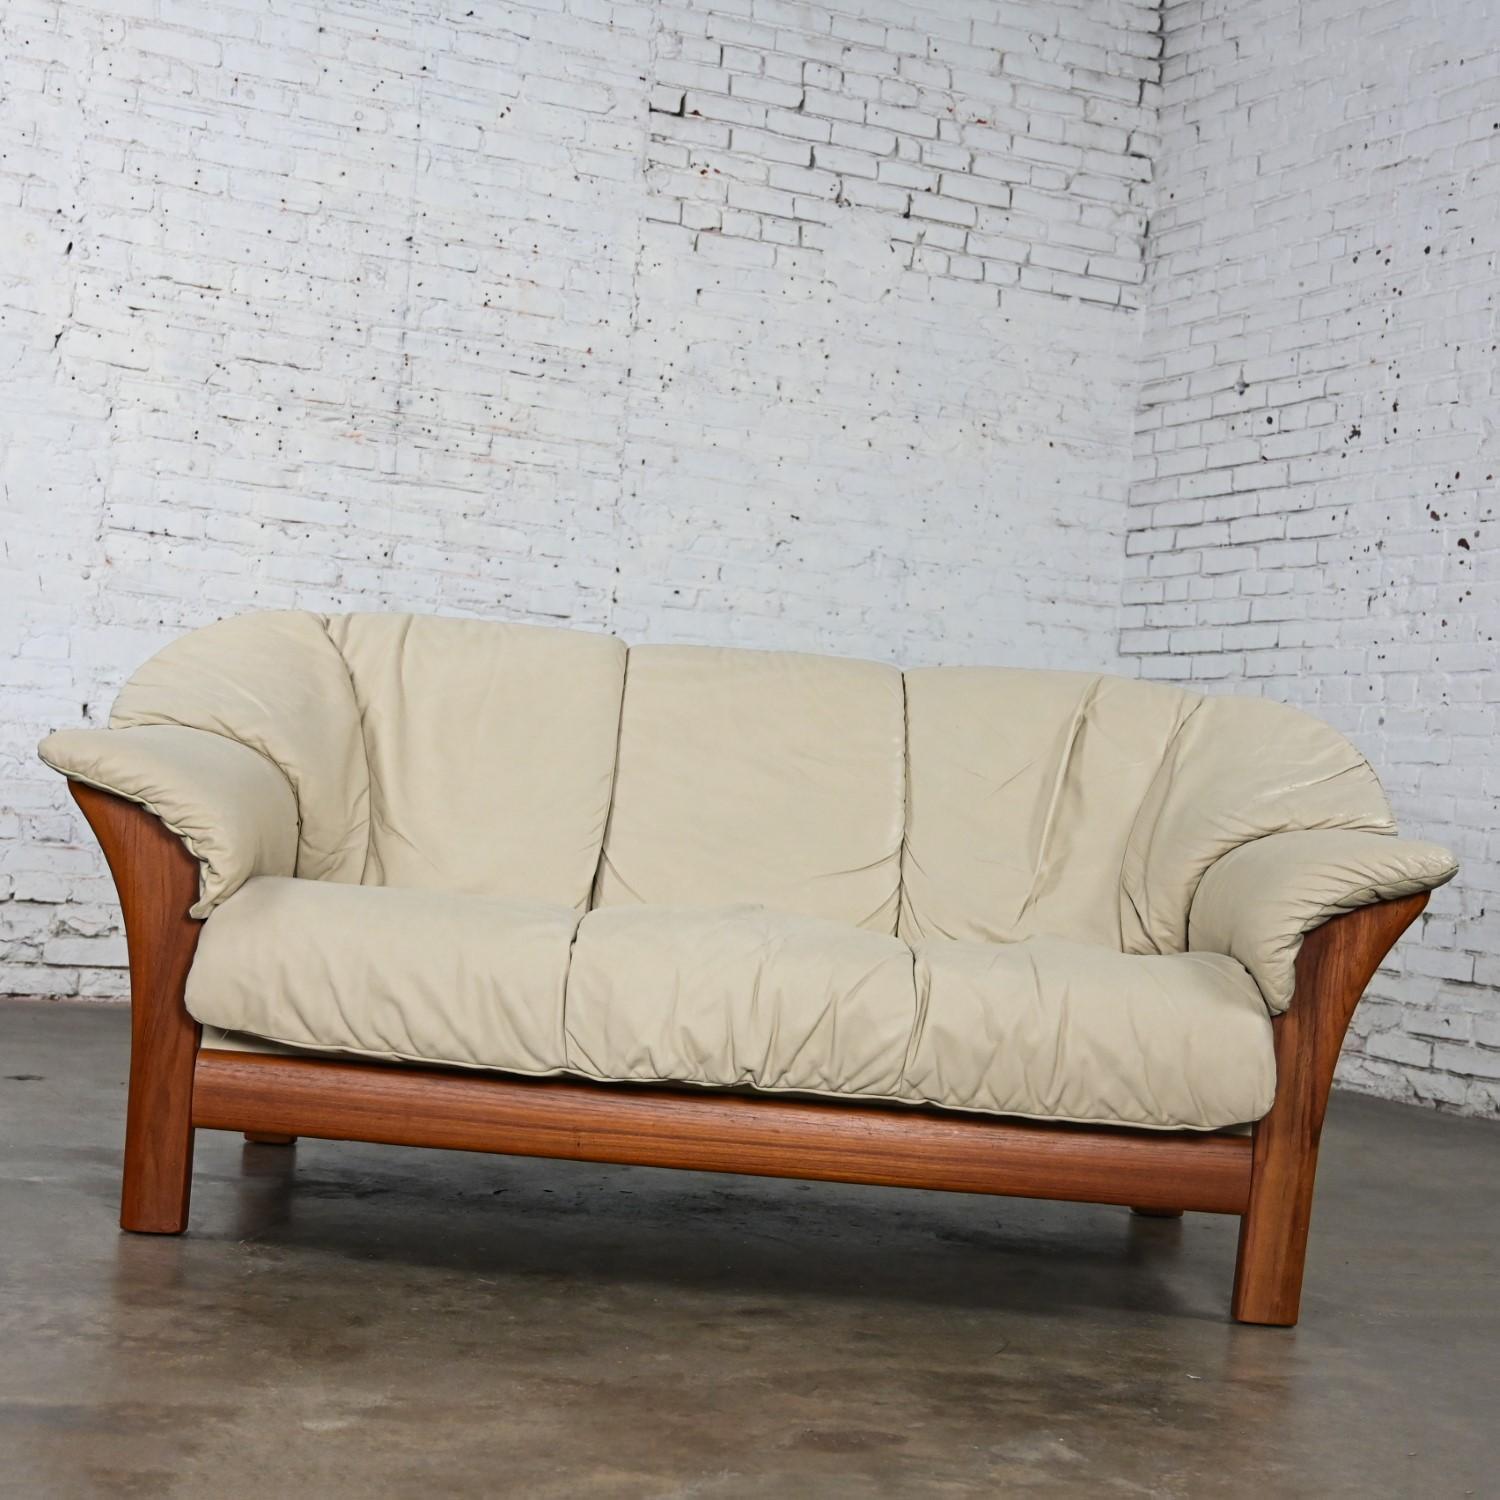 Scandinavian Modern Teak & Off White Leather Small Sofa Attributed to Ekornes For Sale 14